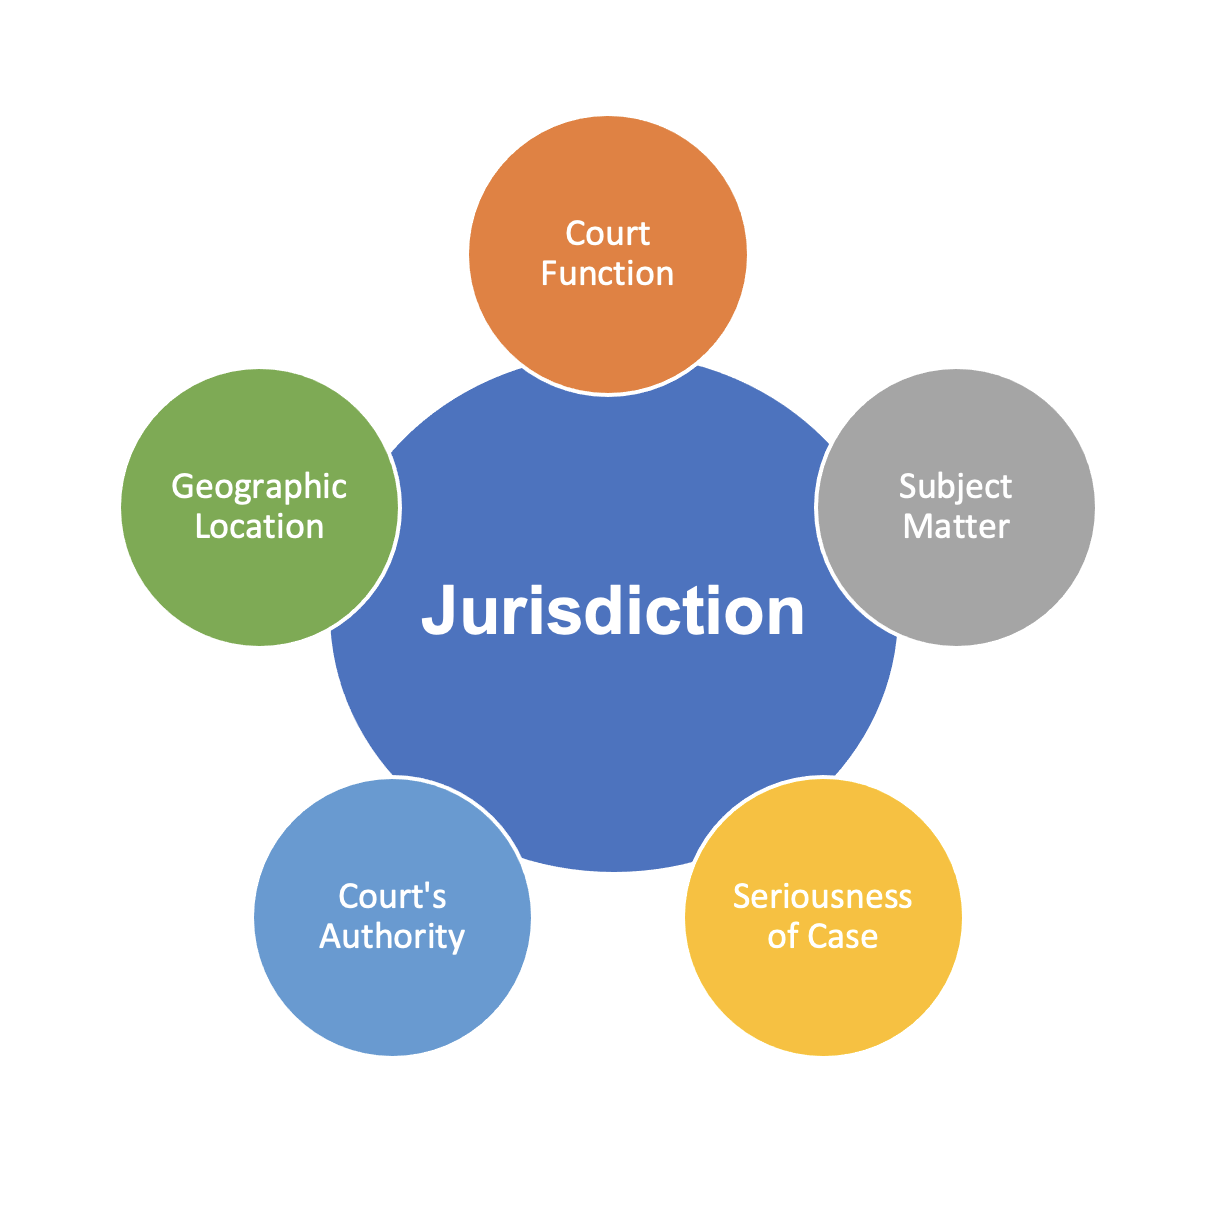 A figure showing the different elements that make up court jurisdiction (Court Function, Subject Matter, Seriousness of Case, Court's Authority, Geographic Location).